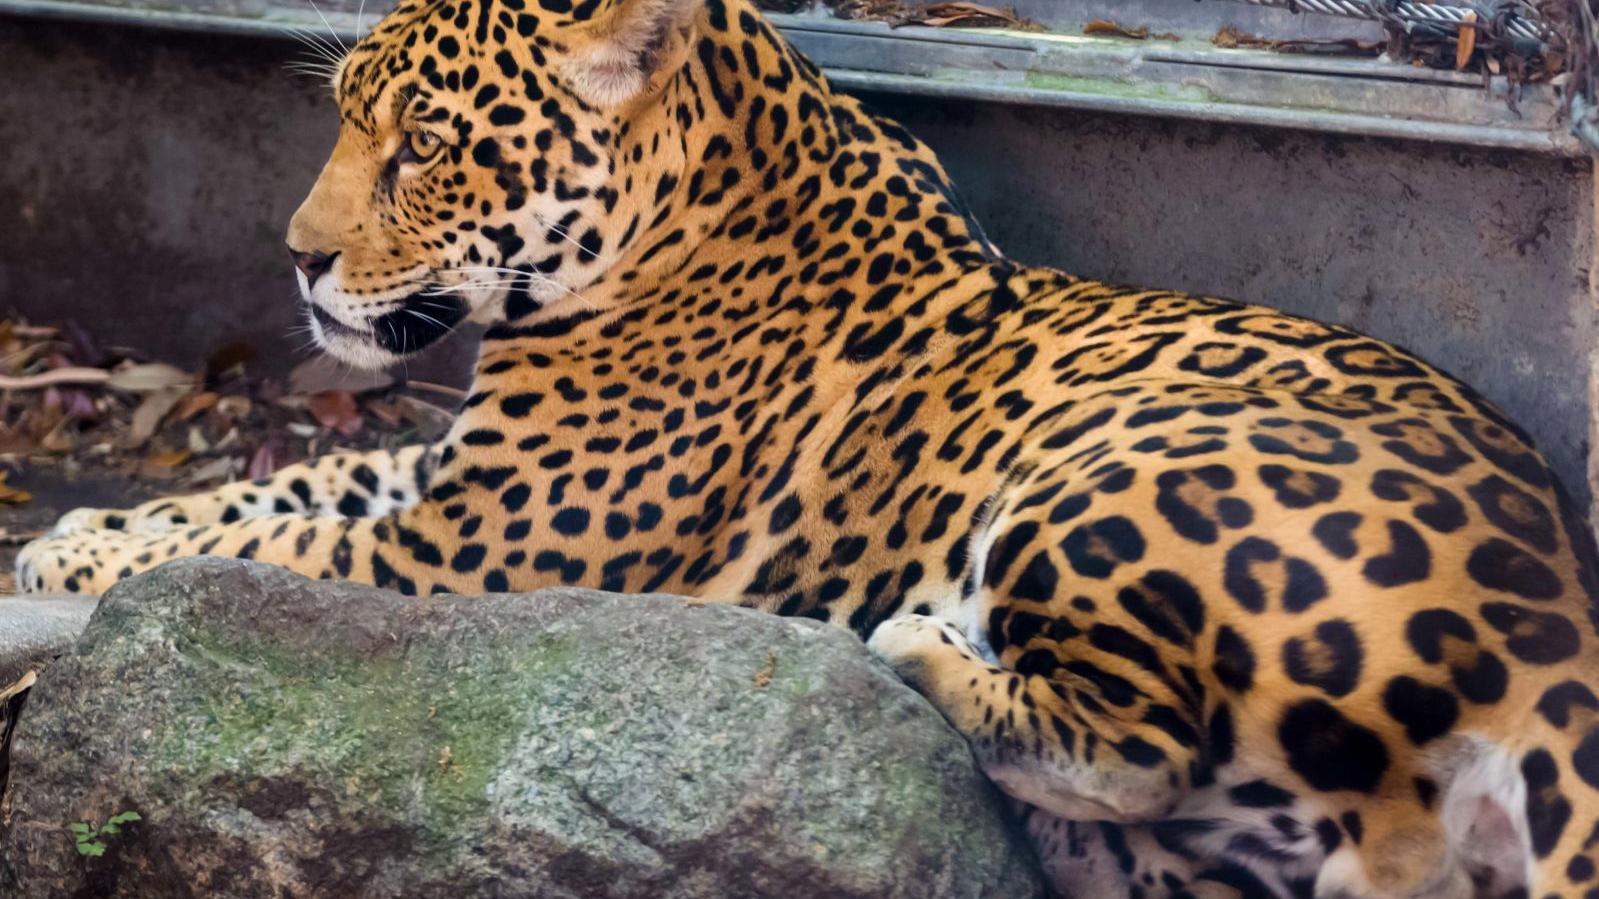 Jaguar at Audubon Zoo busted steel barrier before killing 9 animals,  officials believe | News 